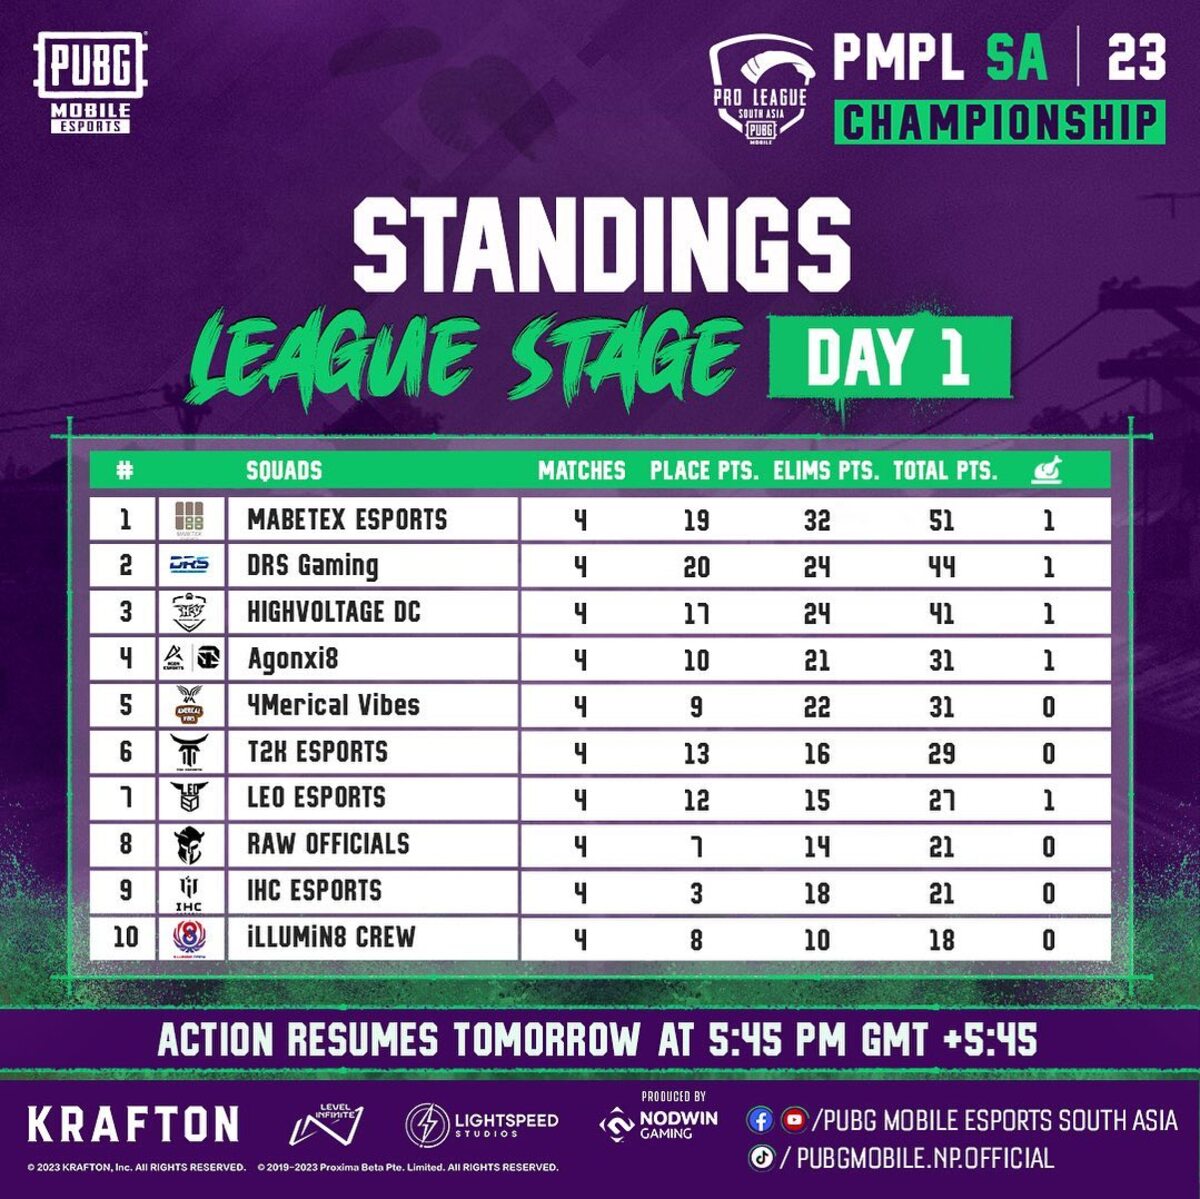 PMPL SA Championship 2023 Spring: Mabetex Esports tops the leaderboard after League Stage Day 1 matches, CHECK STANDINGS HERE